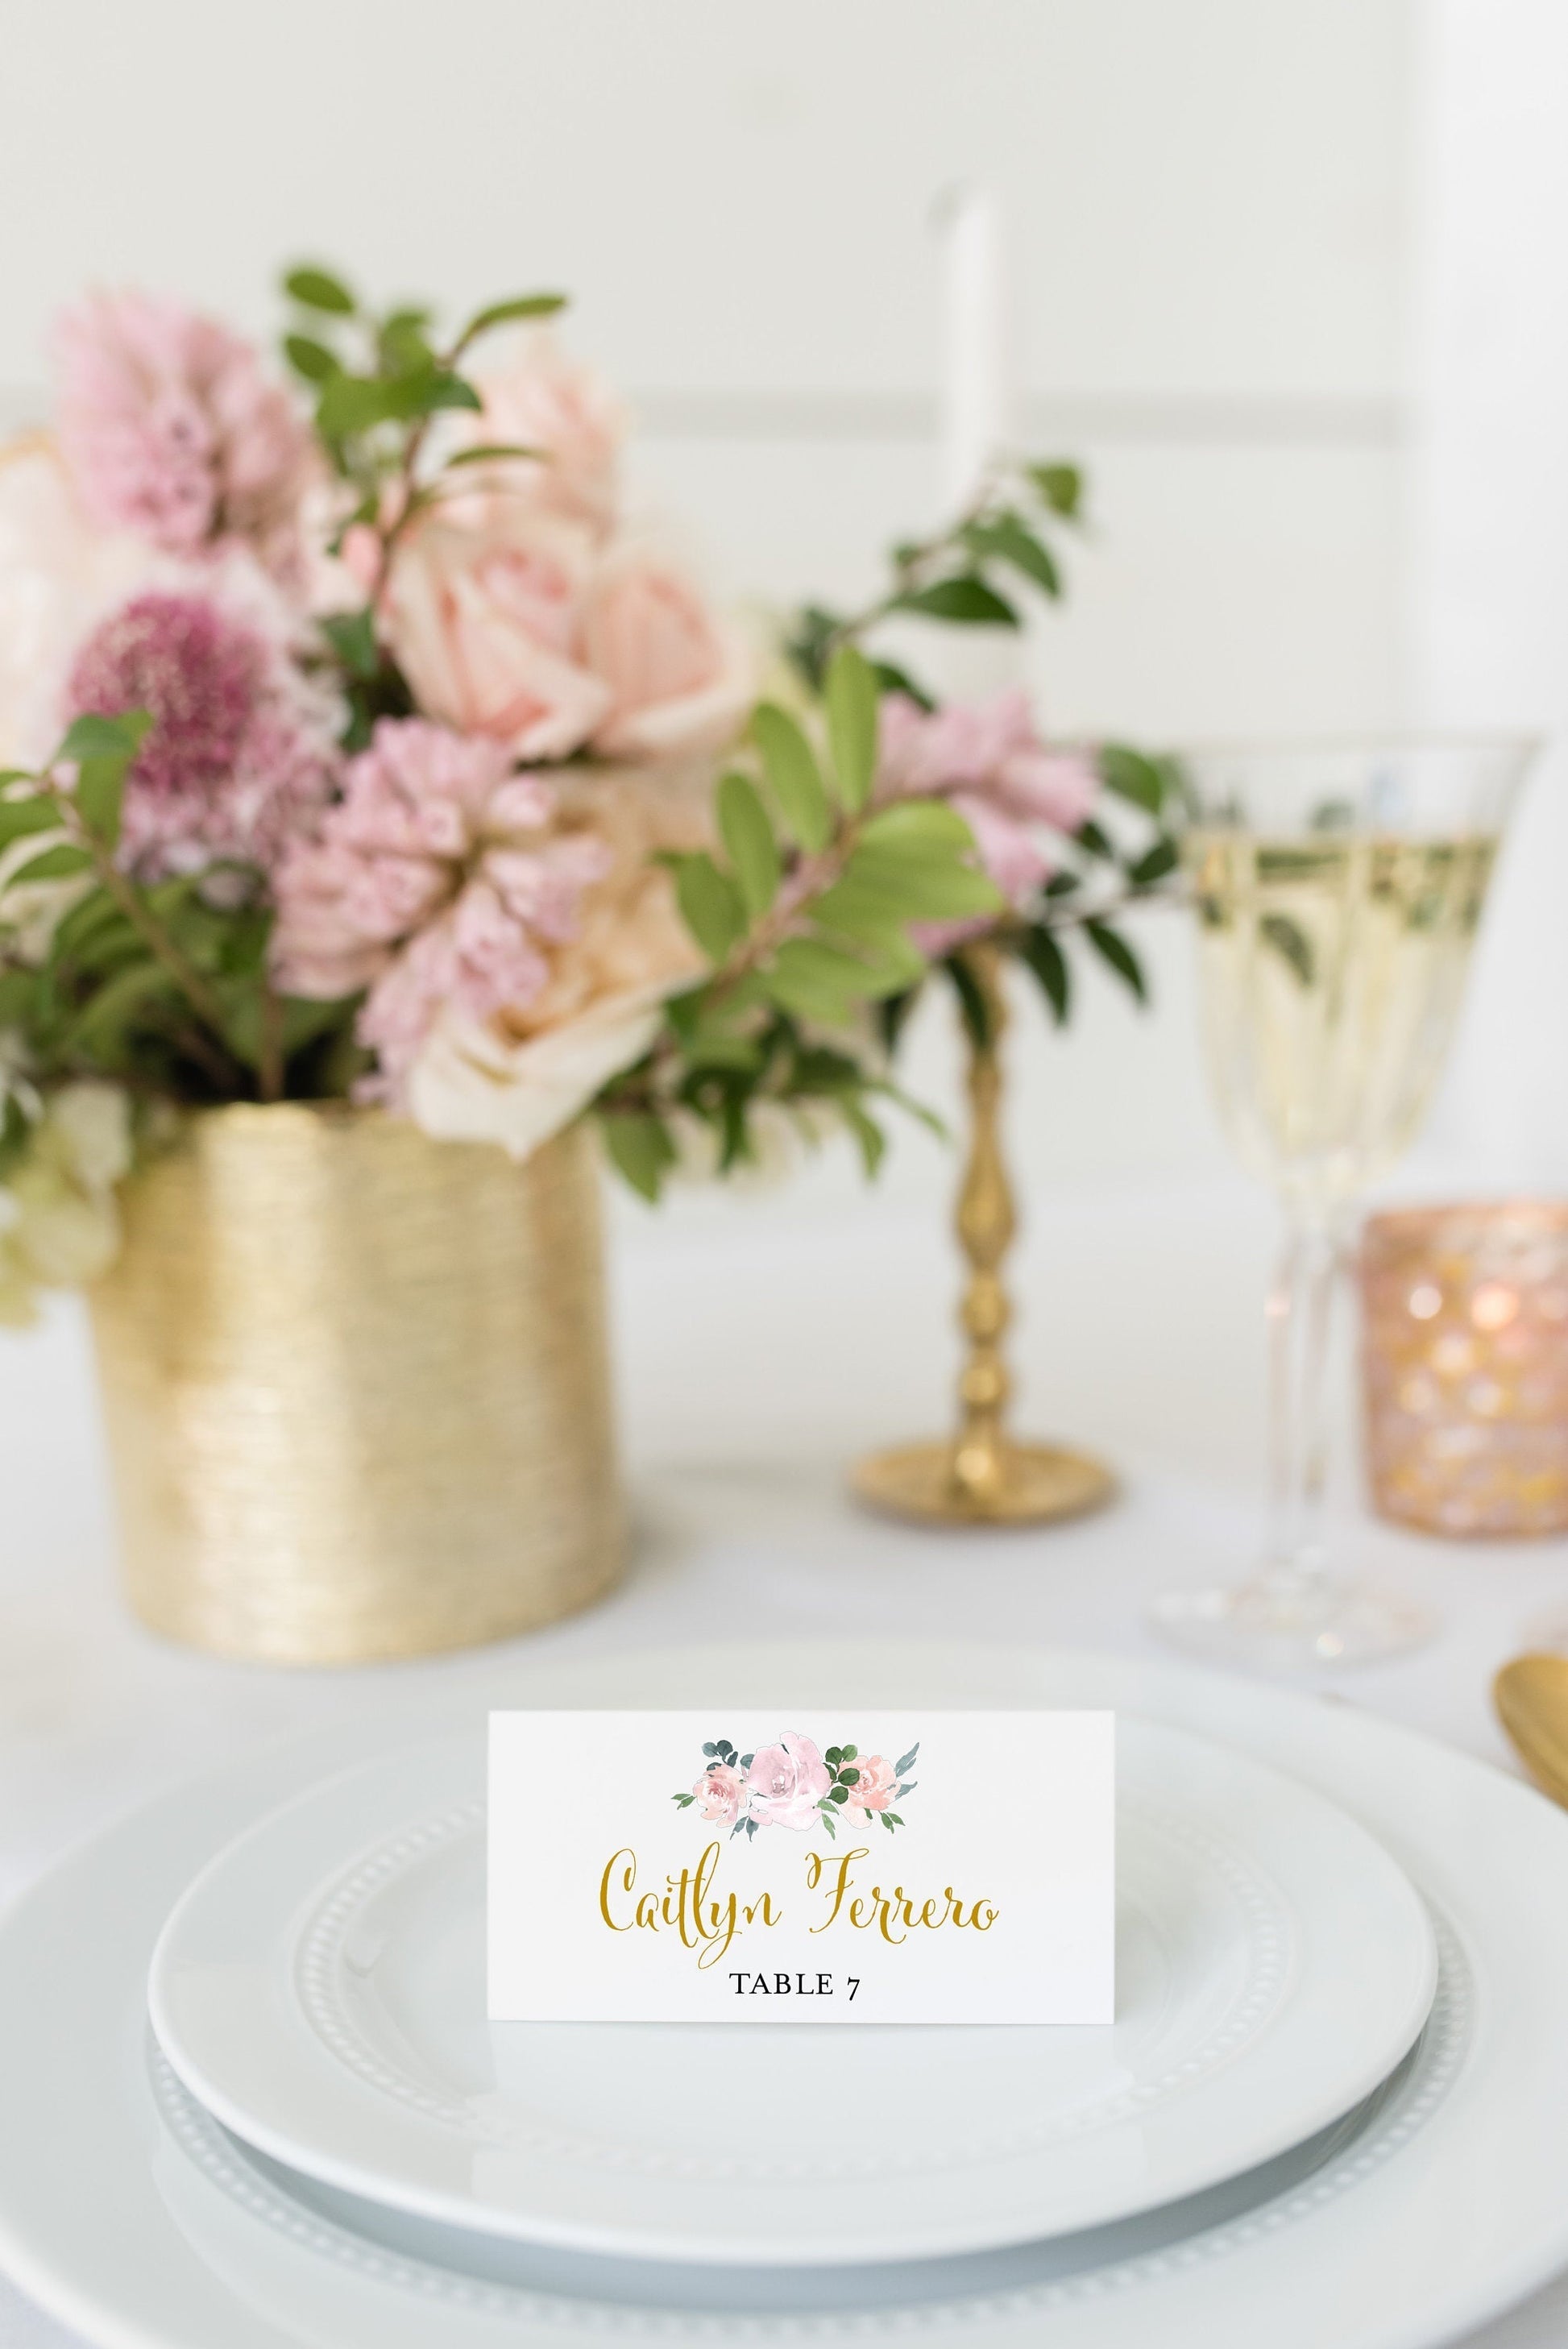 Place Card Template Templett Wedding Escort Cards Printable Place Card, Place Cards Gold Blush Editable Wedding - Rhea PLACE CARDS SAVVY PAPER CO